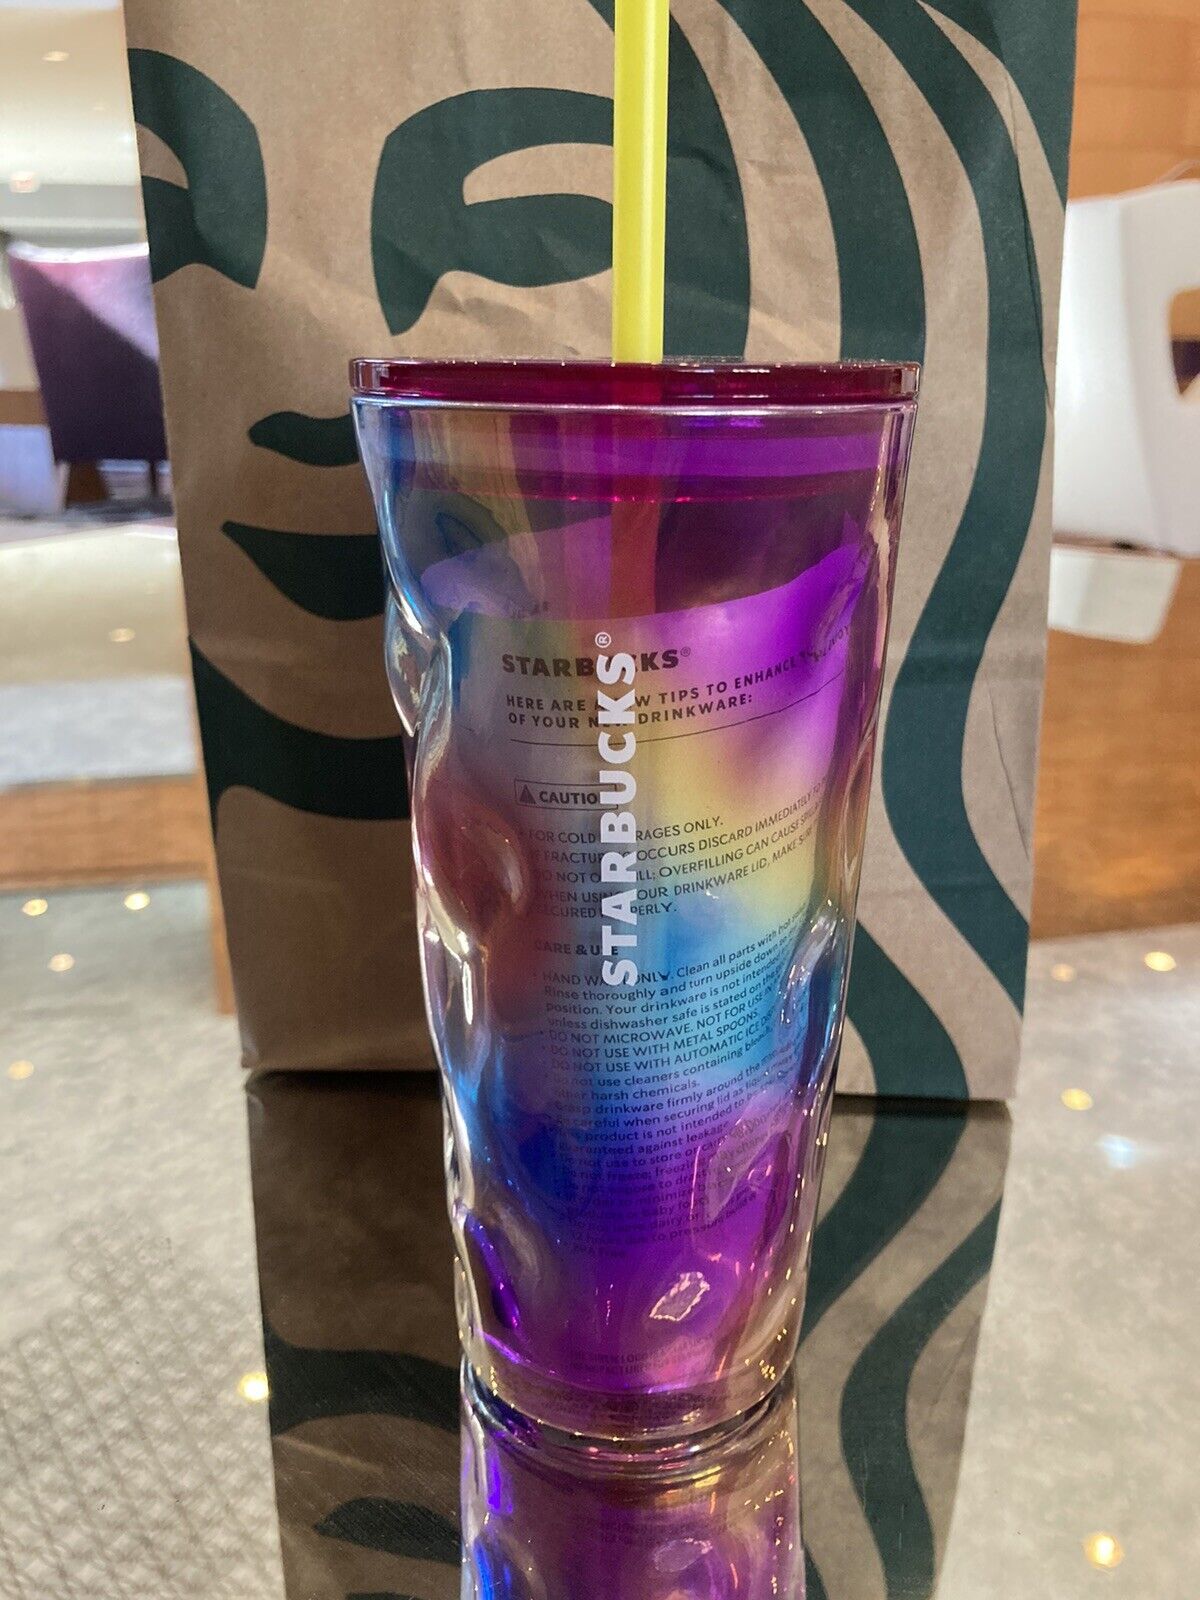 2014 STARBUCKS MOTTLED BLUE and PURPLE 18oz GLASS COLD CUP